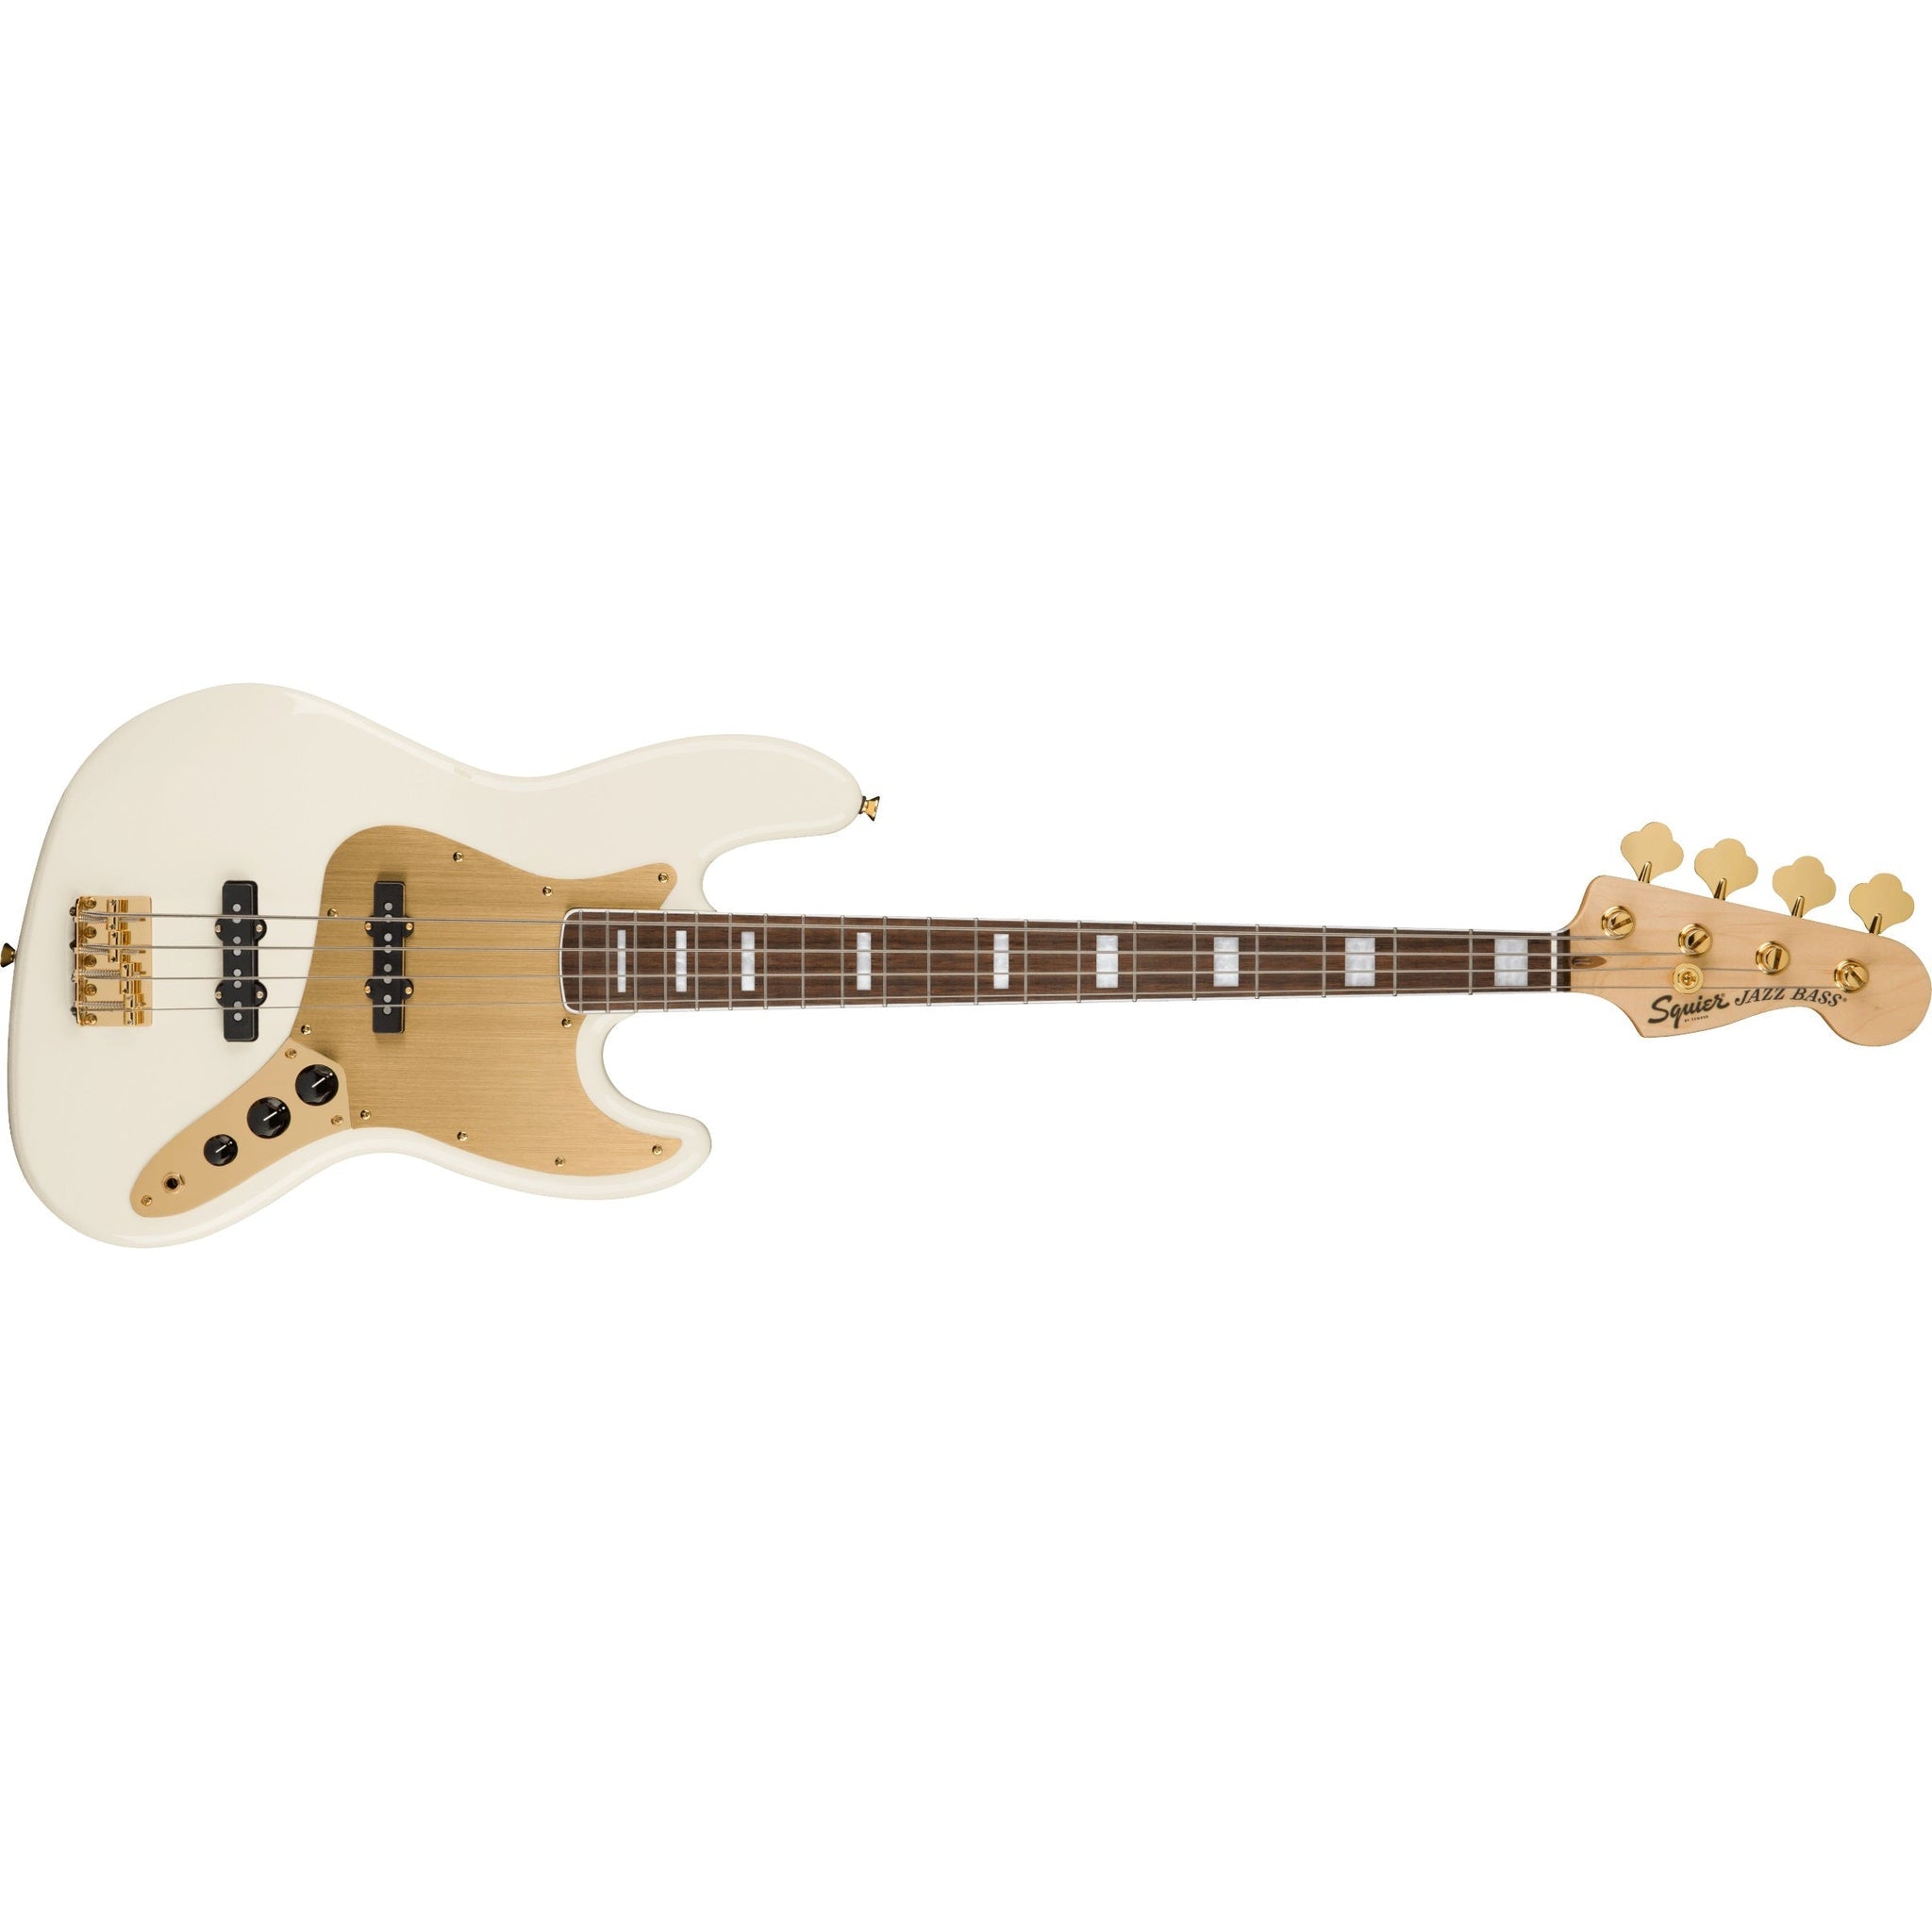 Fender Squier 40th Anniversary Gold Edition Jazz Bass Guitar-Olympic White-Music World Academy